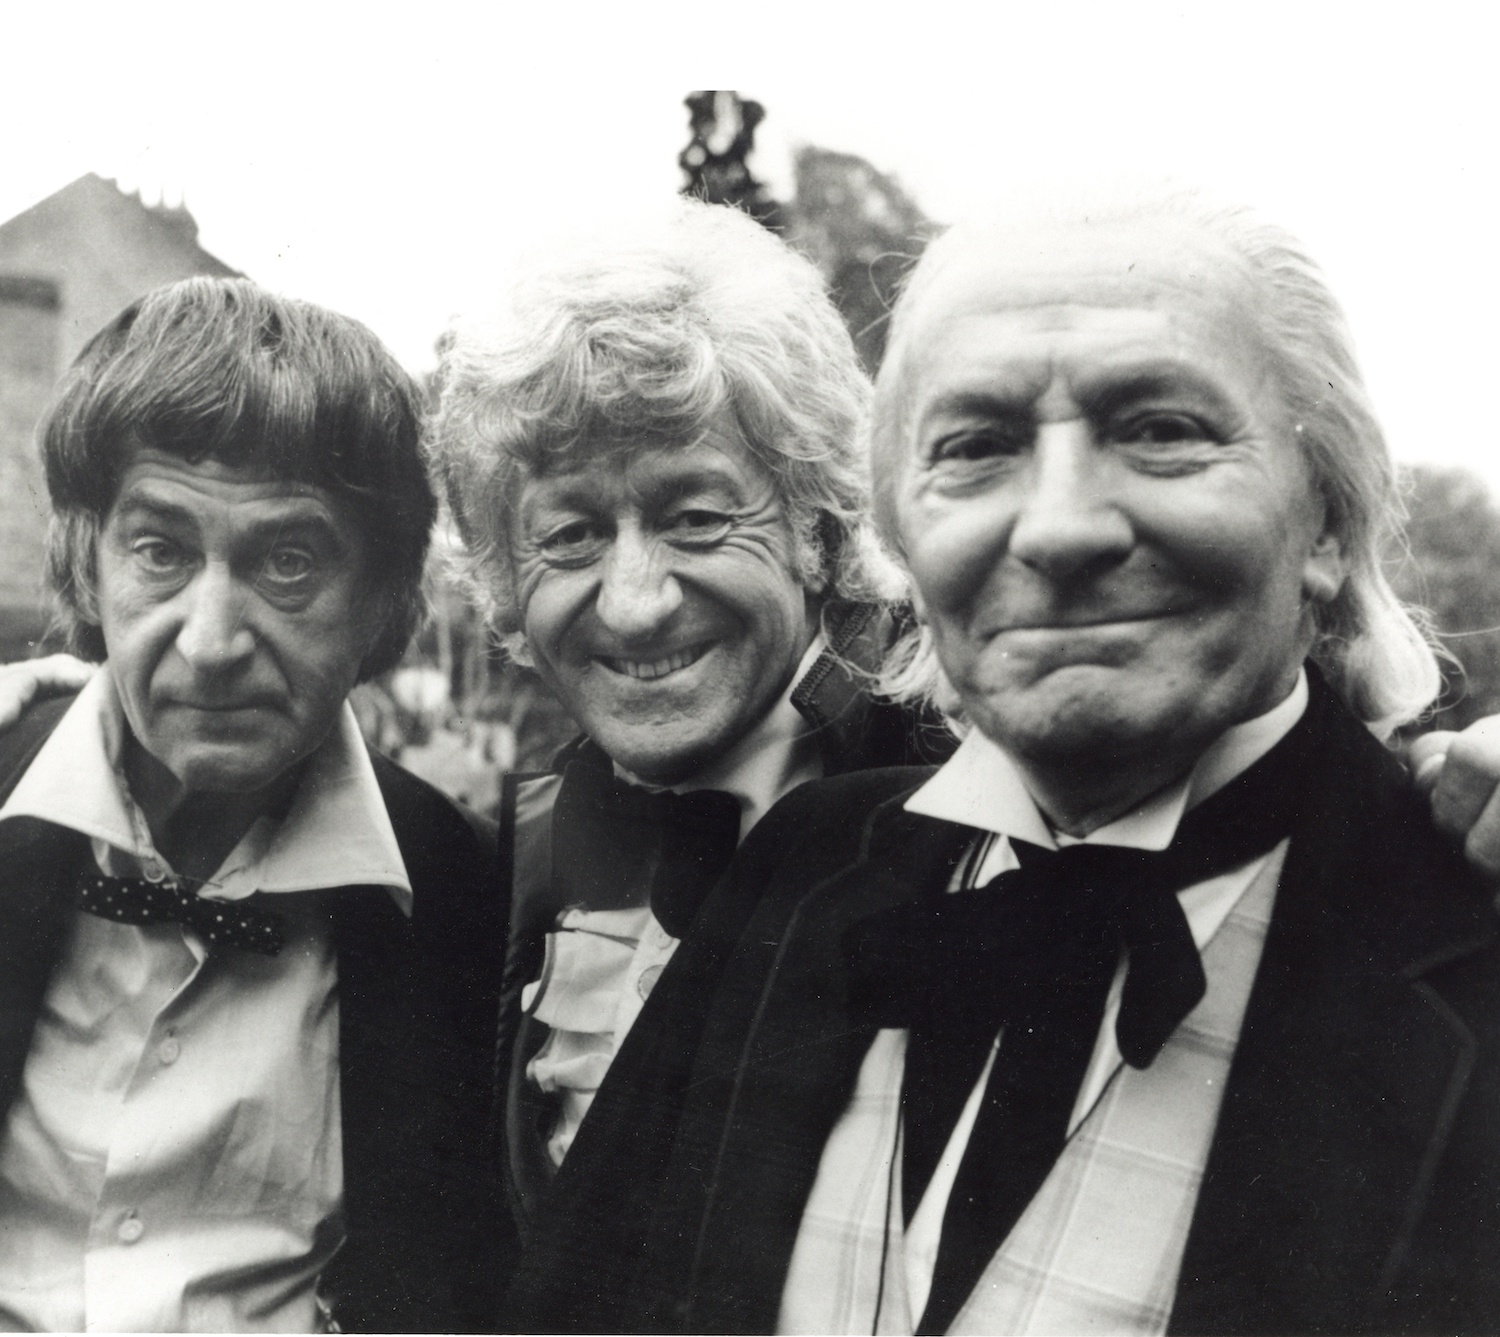 William Hartnell, Jon Pertwee and Patrick Troughton, stars of Dr Who